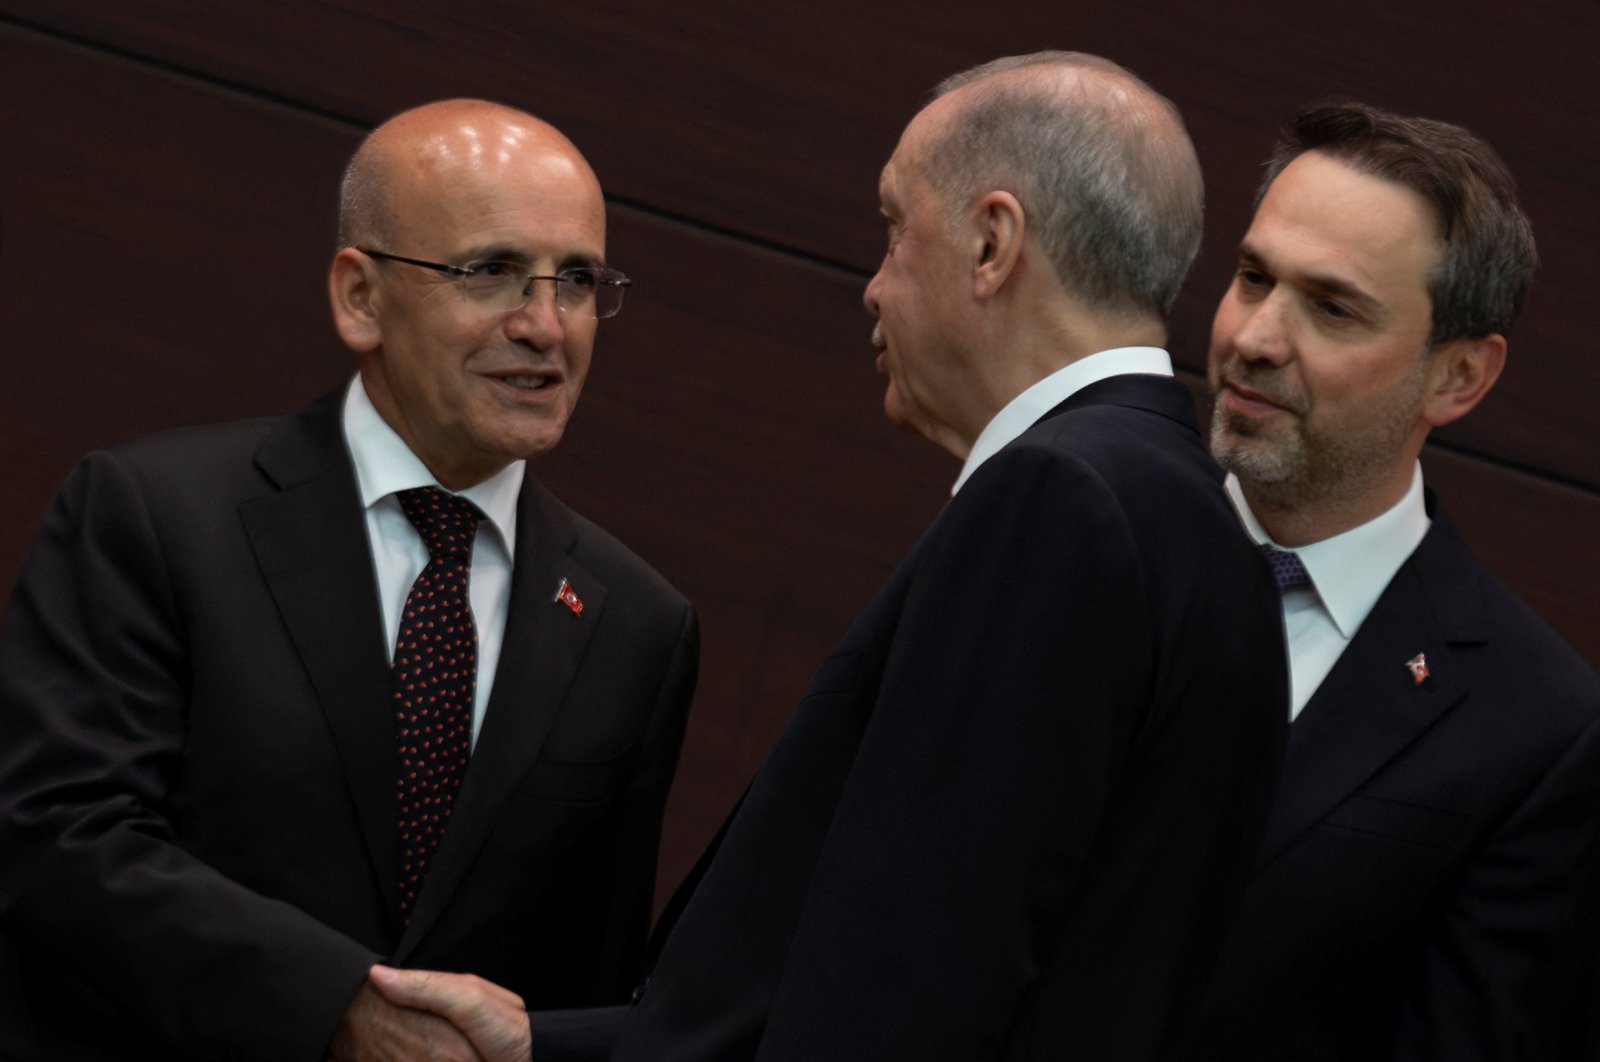 President Recep Tayyip Erdoğan shakes hands with the new treasury and finance minister, Mehmet Şimşek, during a news conference where the new Cabinet was announced, in Ankara, Türkiye, June 3, 2023. (Reuters Photo)